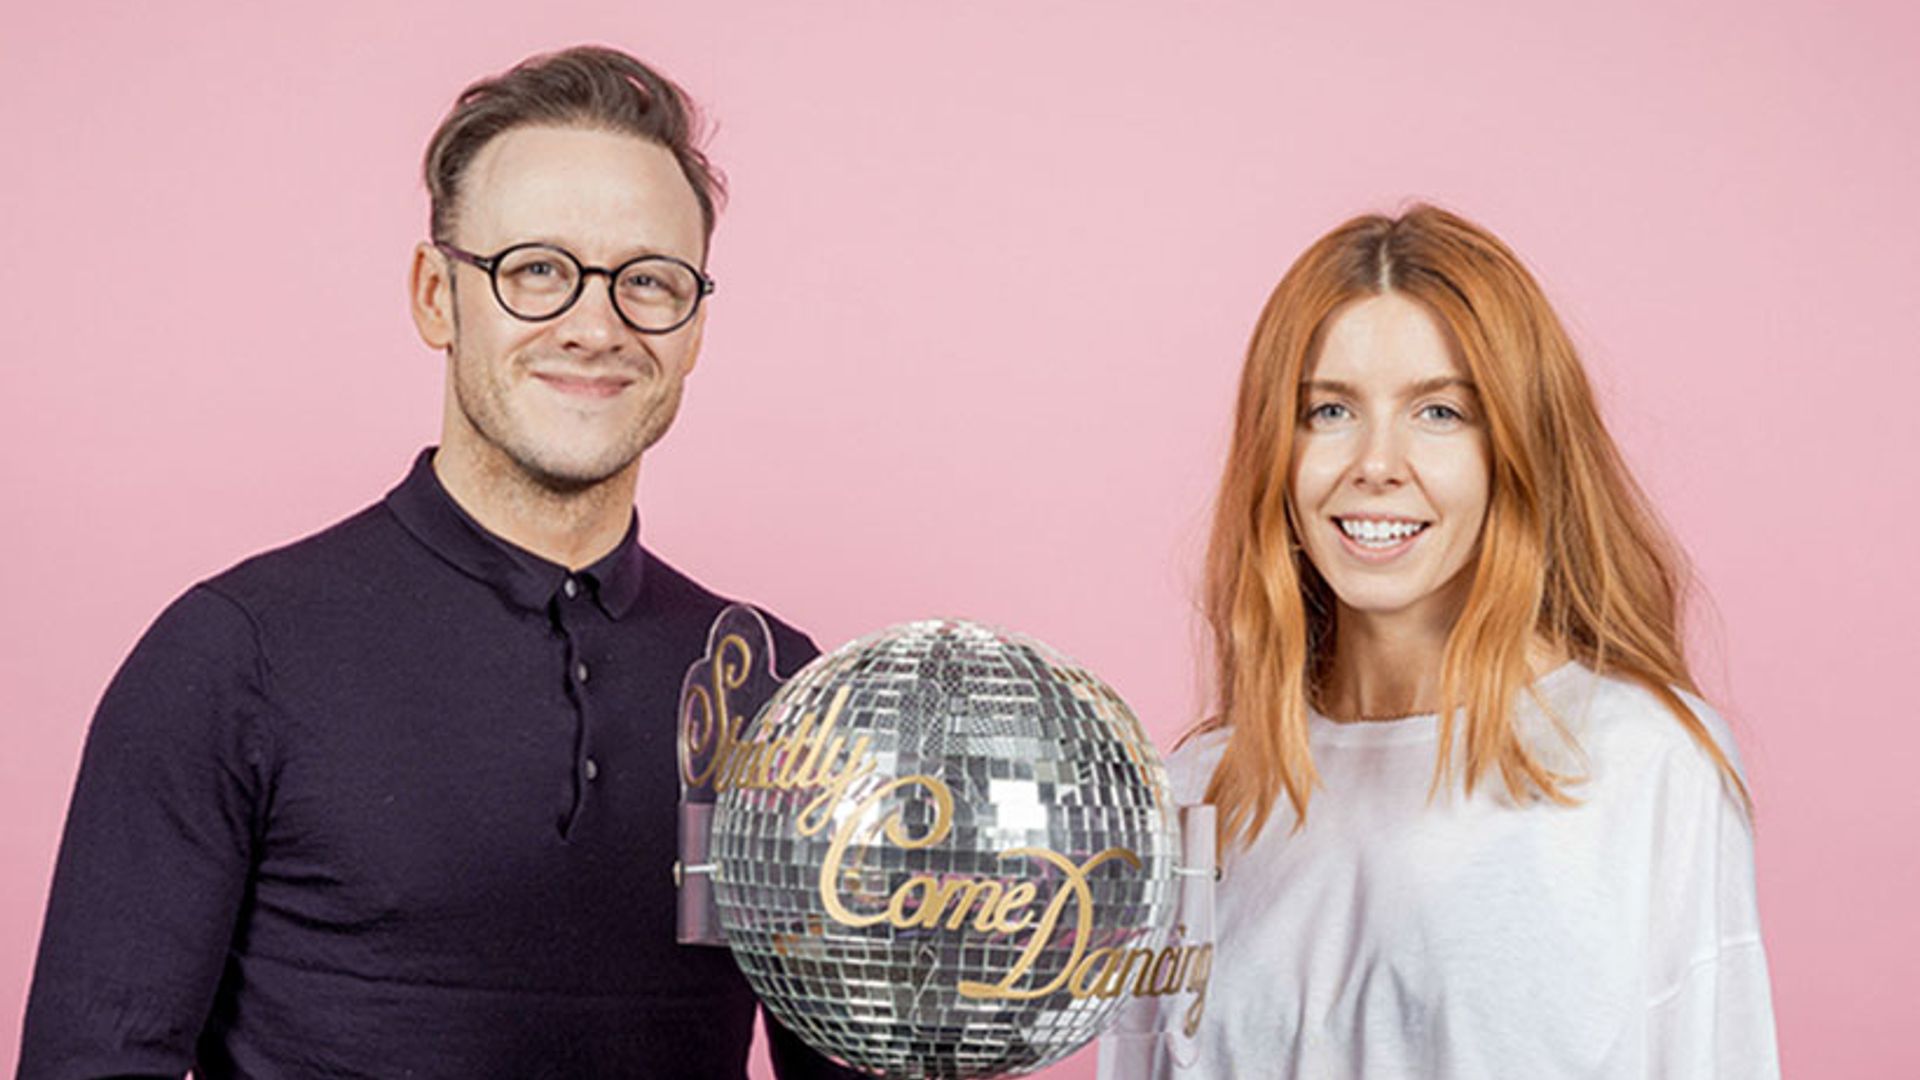 Strictly Come Dancing's Kevin Clifton shows his support for Stacey Dooley